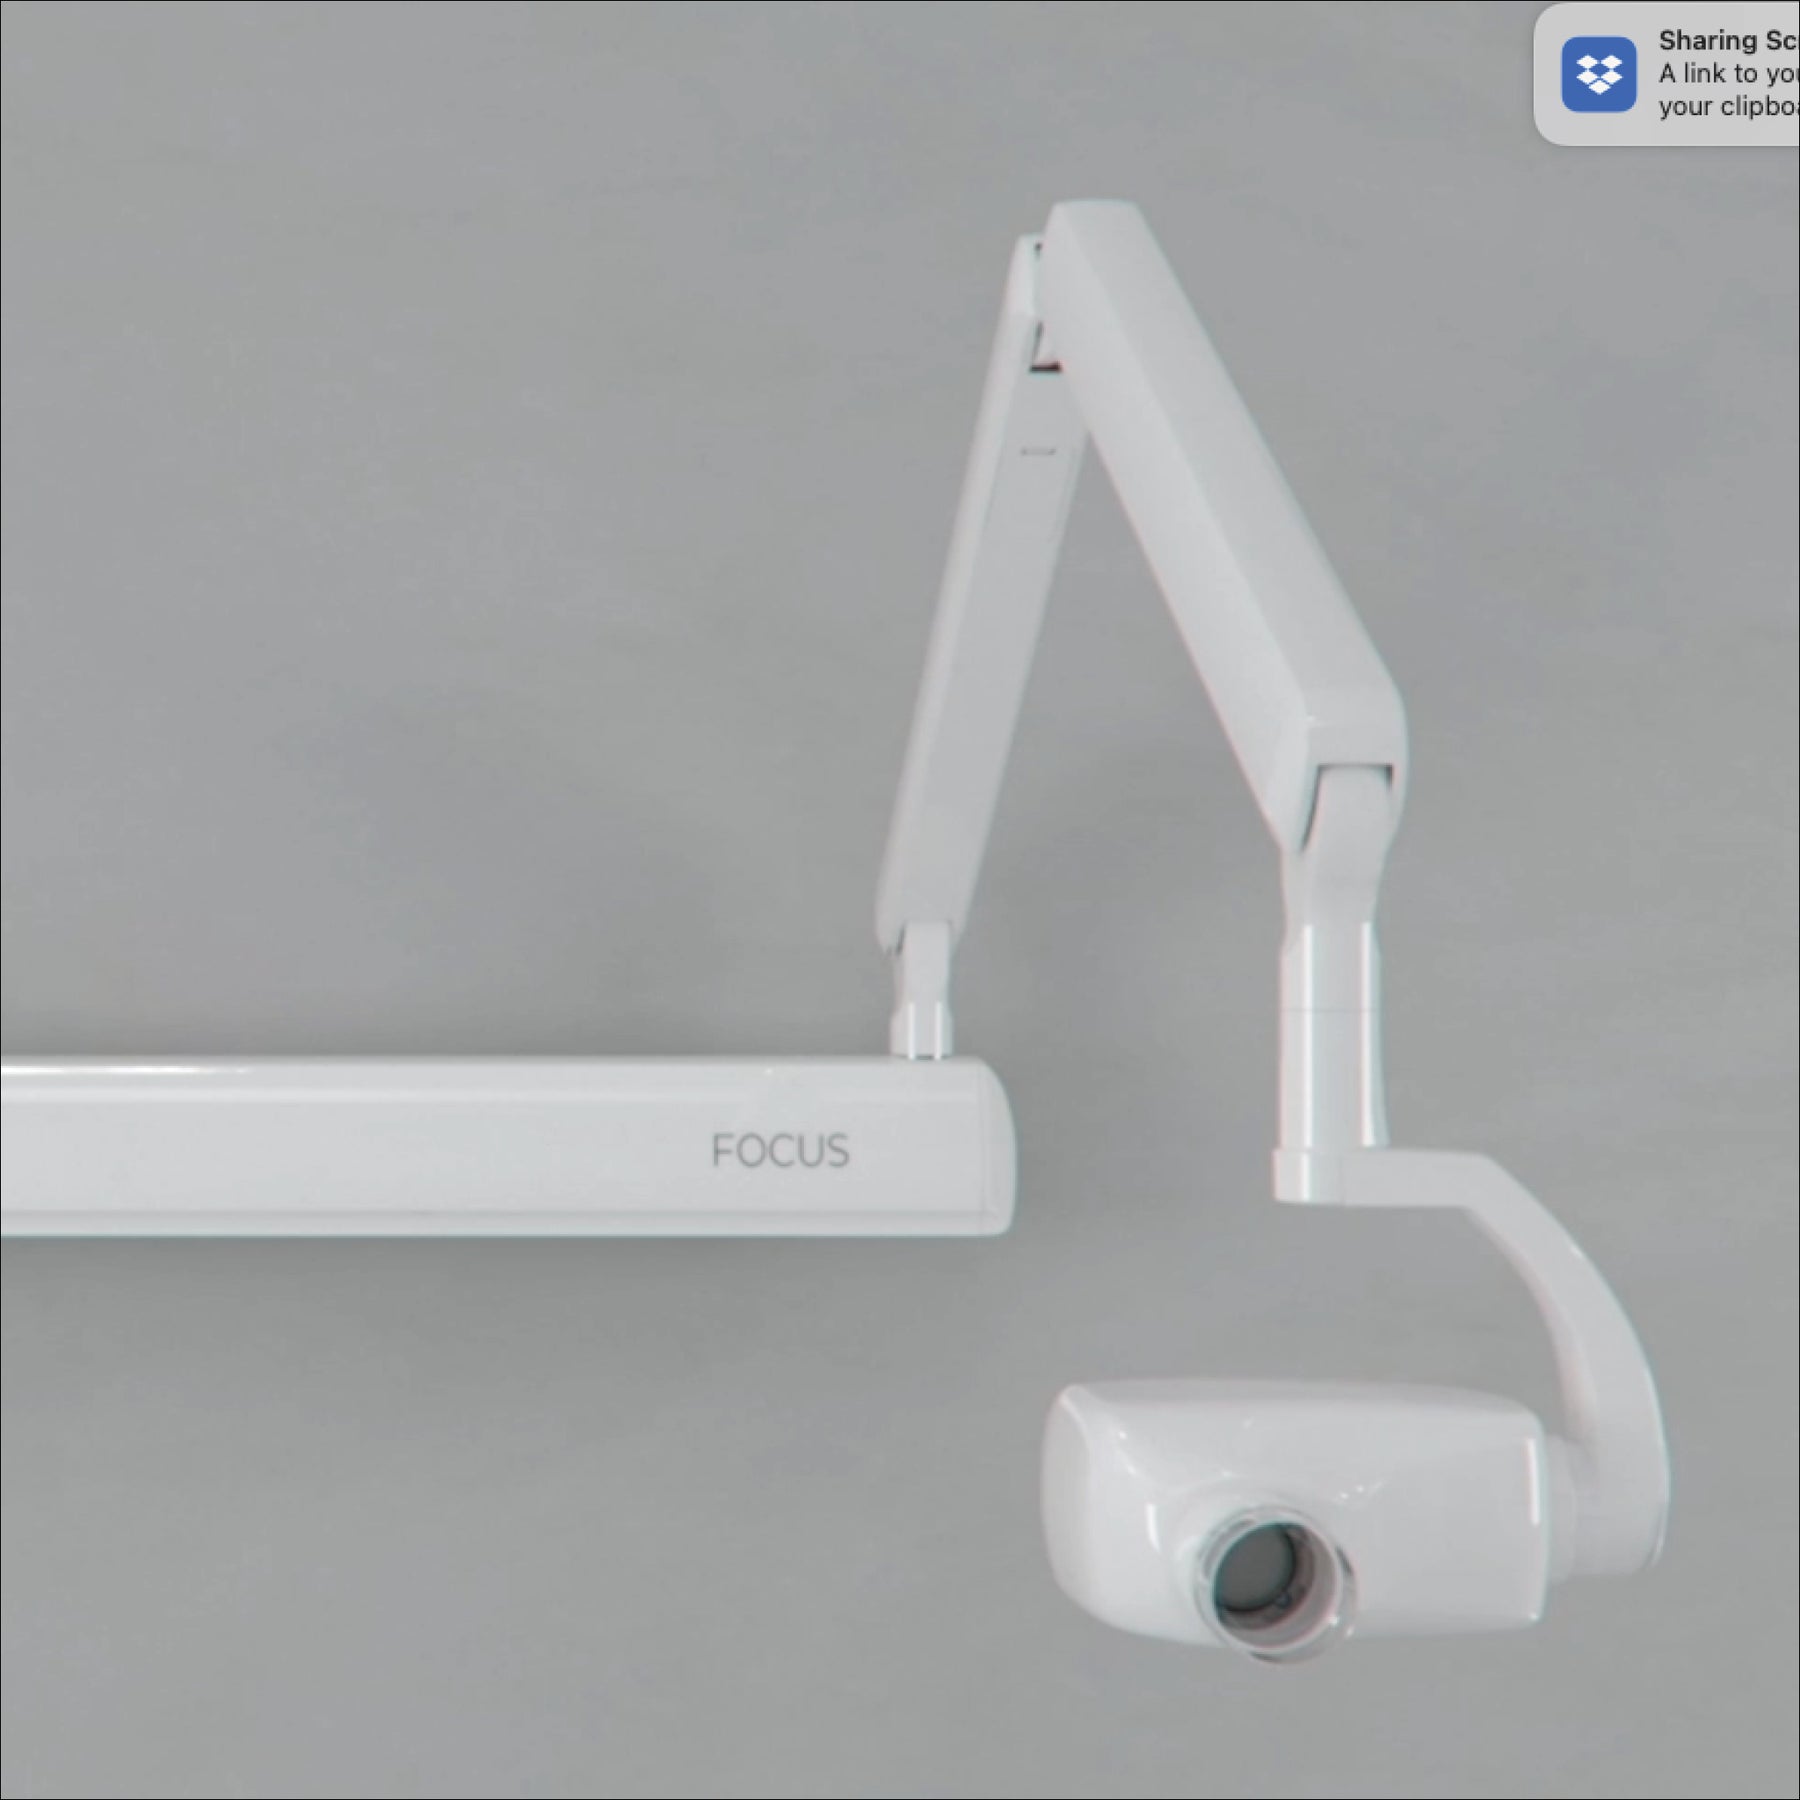 Dexis Focus Intraoral X-ray is extremely stable, yet amazingly light and easy-to-handle